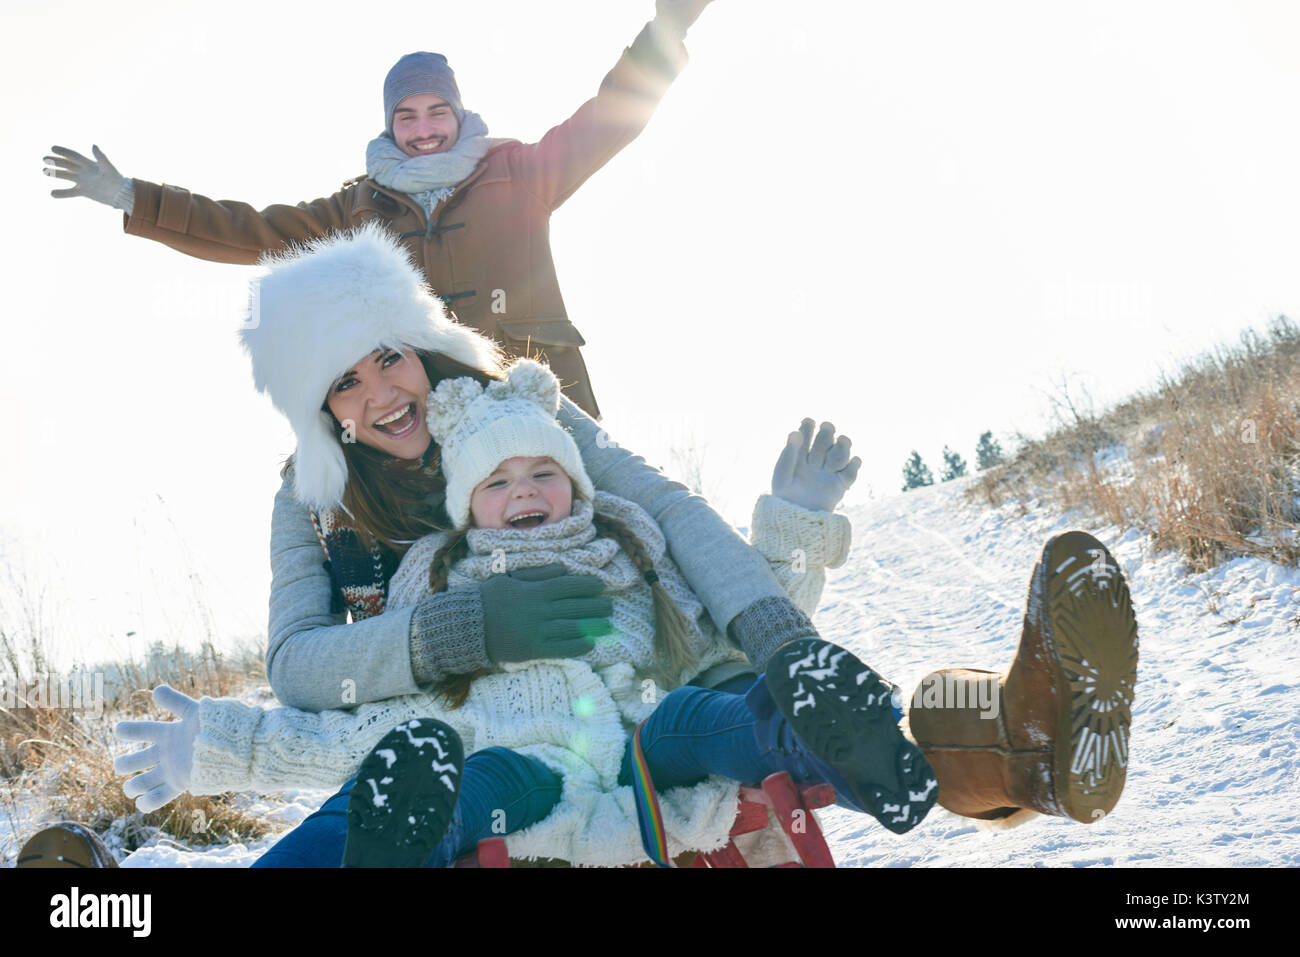 Family driving togobban in winter and having fun Stock Photo